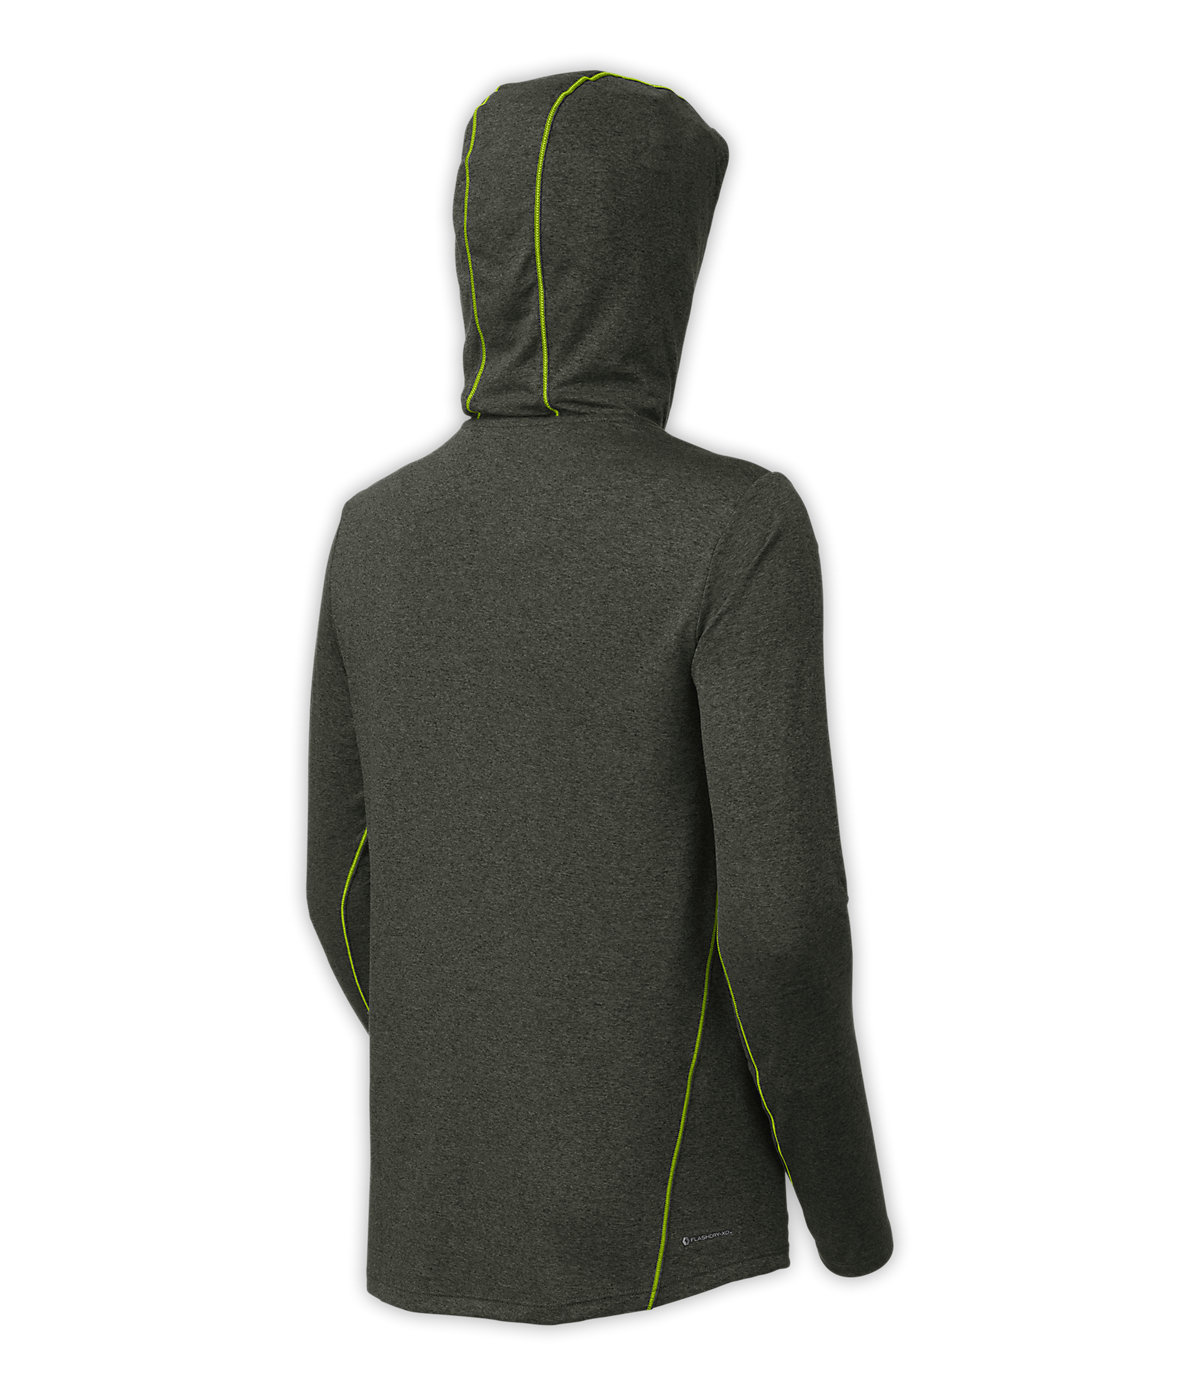 The North Face Men's Reactor Hoodie